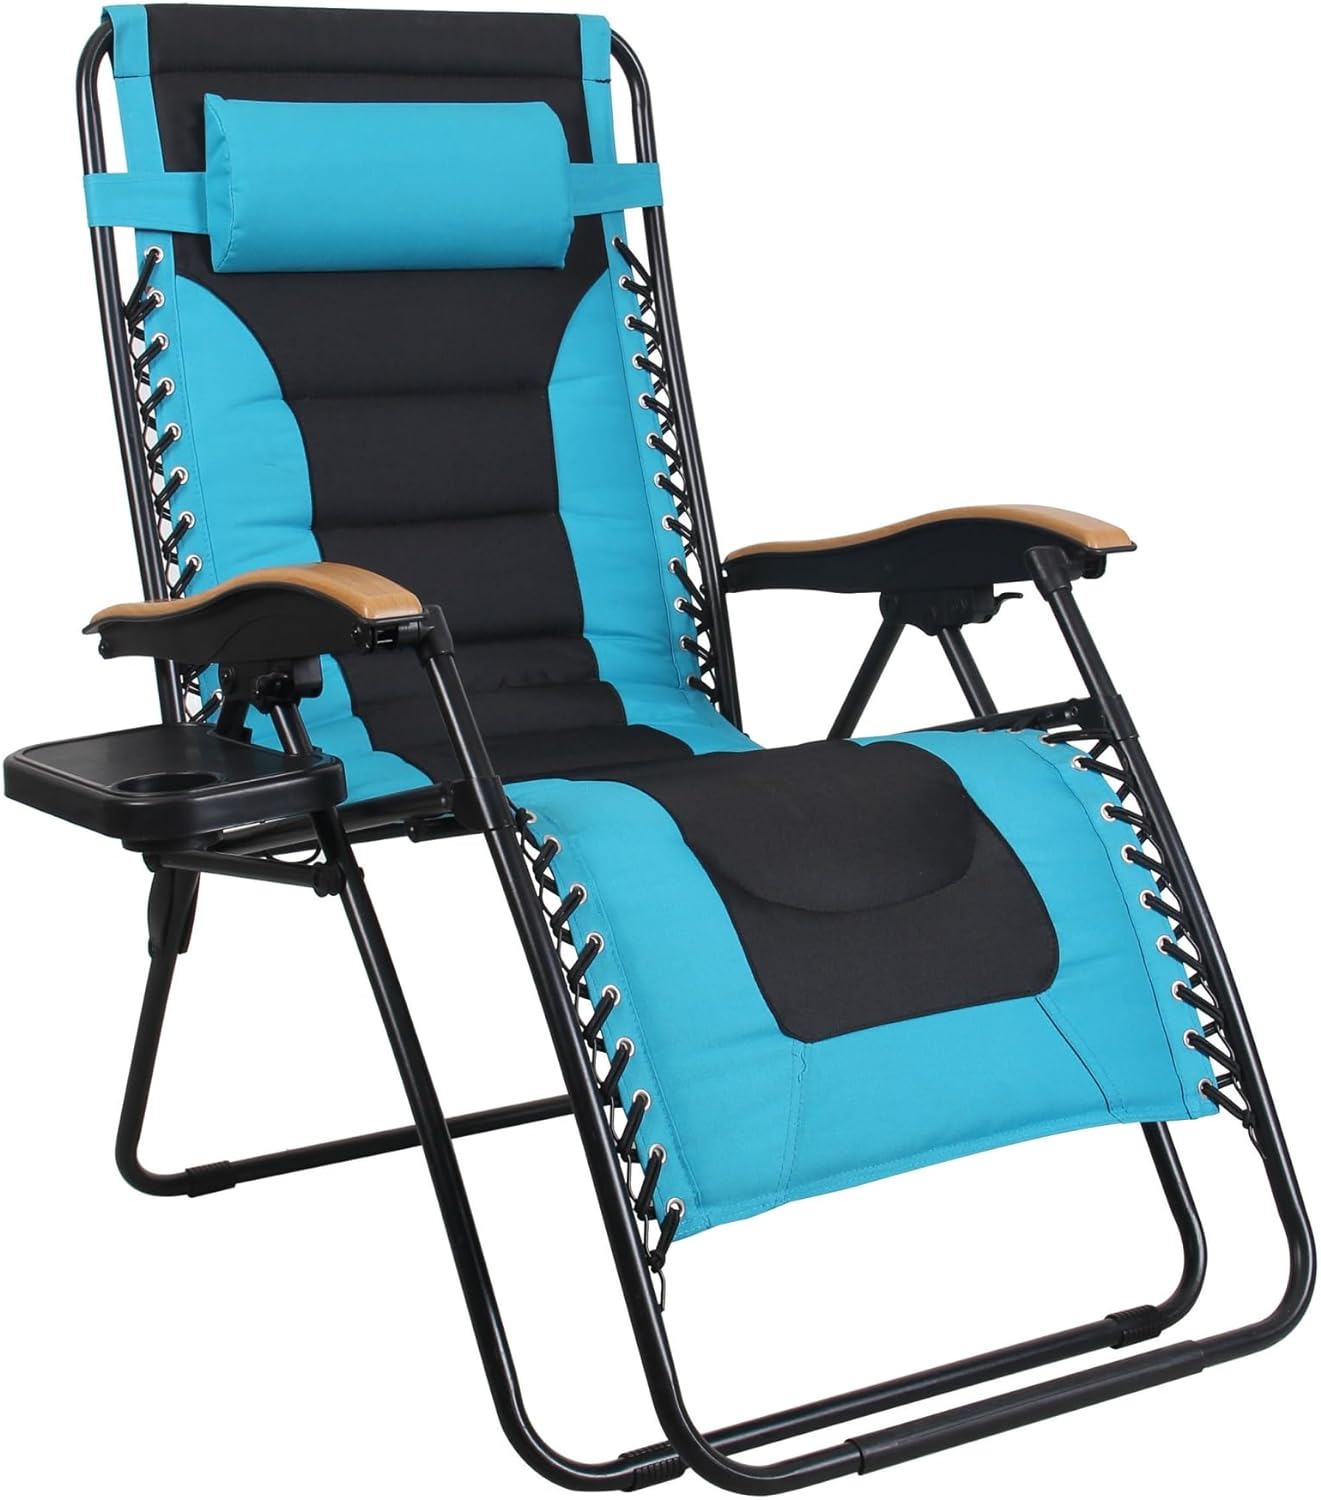 MFSTUDIO Zero Gravity Chairs, Oversized Patio Recliner Chair, Padded Folding Lawn Chair with Cup Holder Tray, Support 400lbs, Pacific Blue